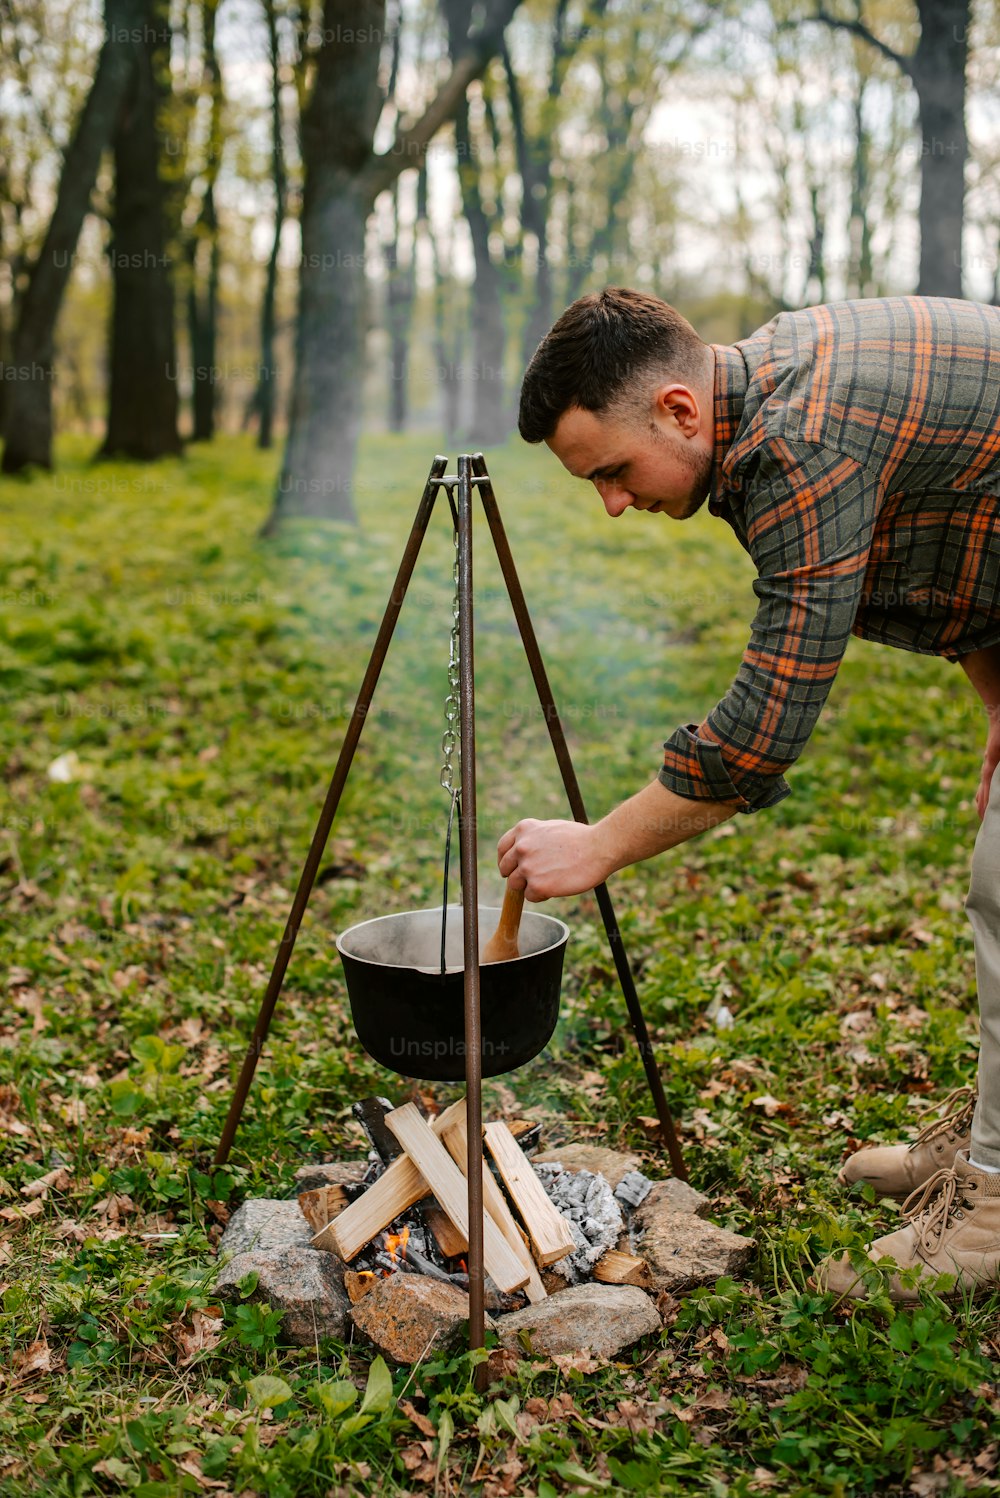 a man cooking food over an open fire in the woods